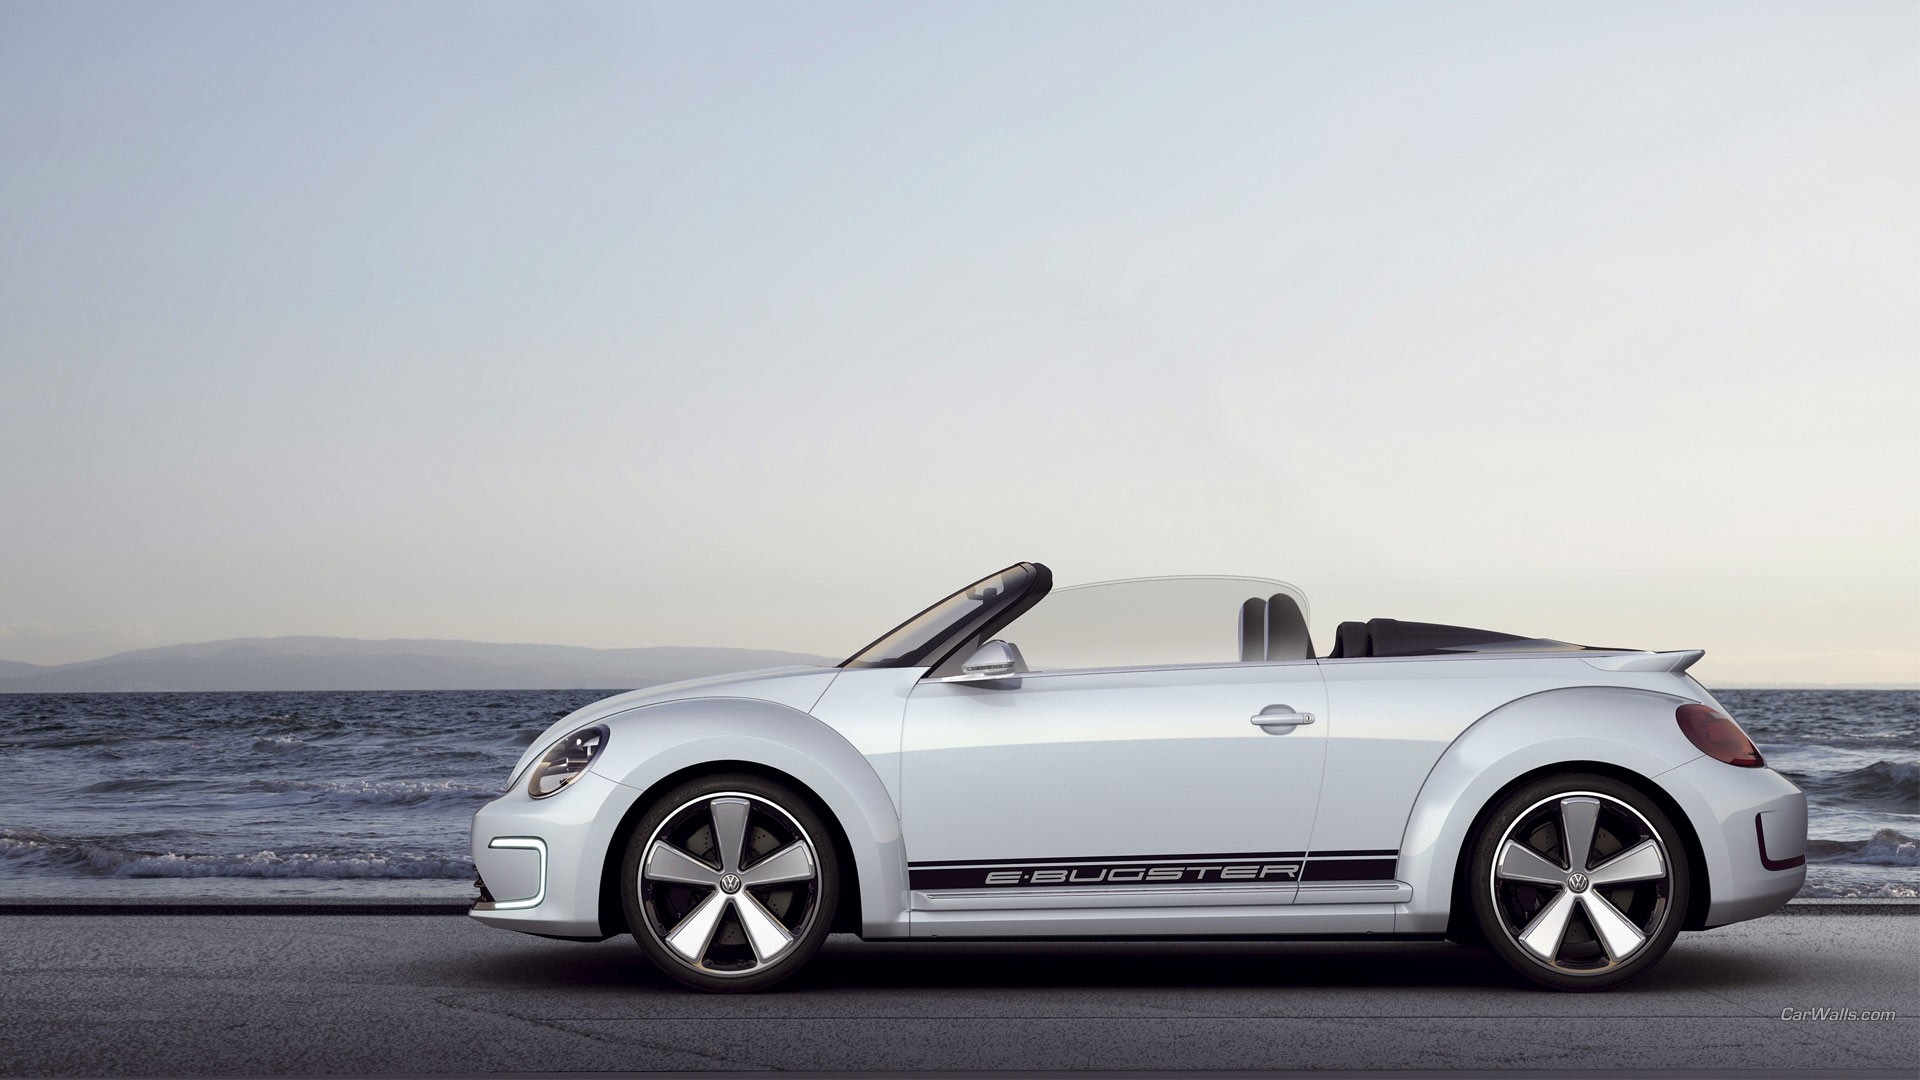 General 1920x1080 VW E-Bugster Volkswagen car Volkswagen New Beetle watermarked vehicle water white cars convertible Volkswagen Group electric car